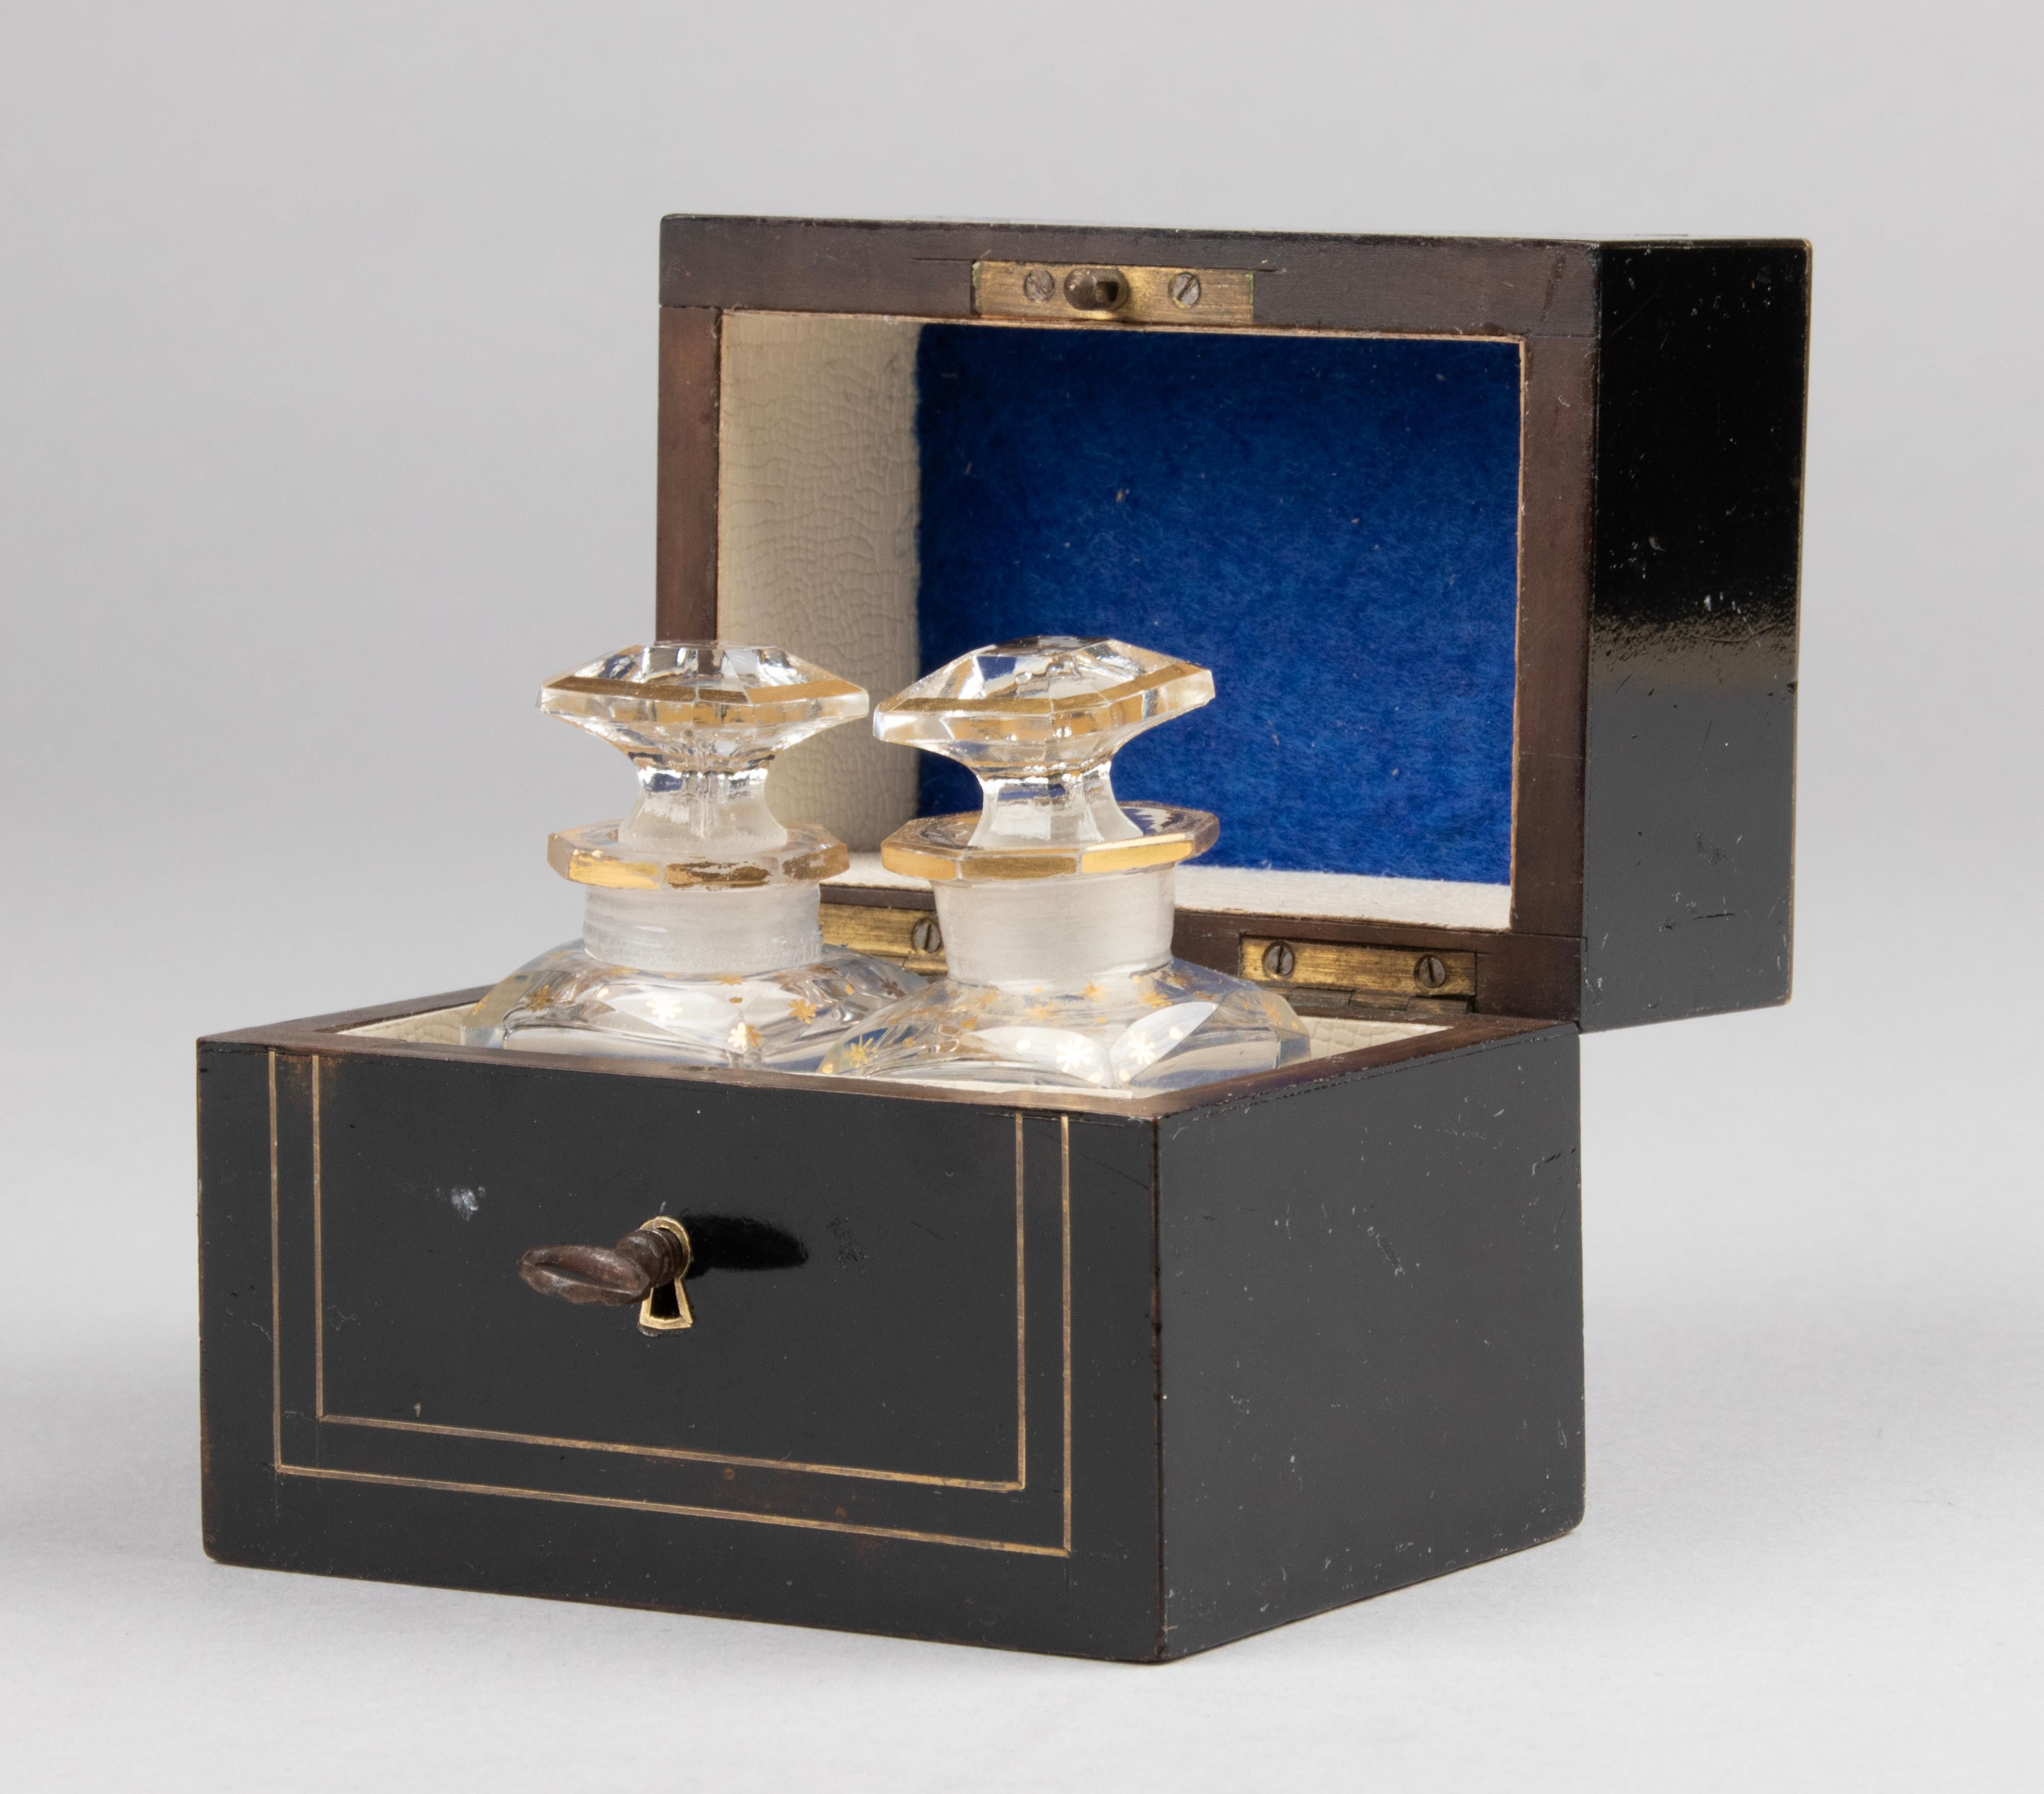 Lovely small antique wooden box with two original perfume bottles. This is quite a rare piece, the fact that it has the original crystal bottles makes it even more desirable. This box is French, from the Napoleon III period. Made of fine wood,